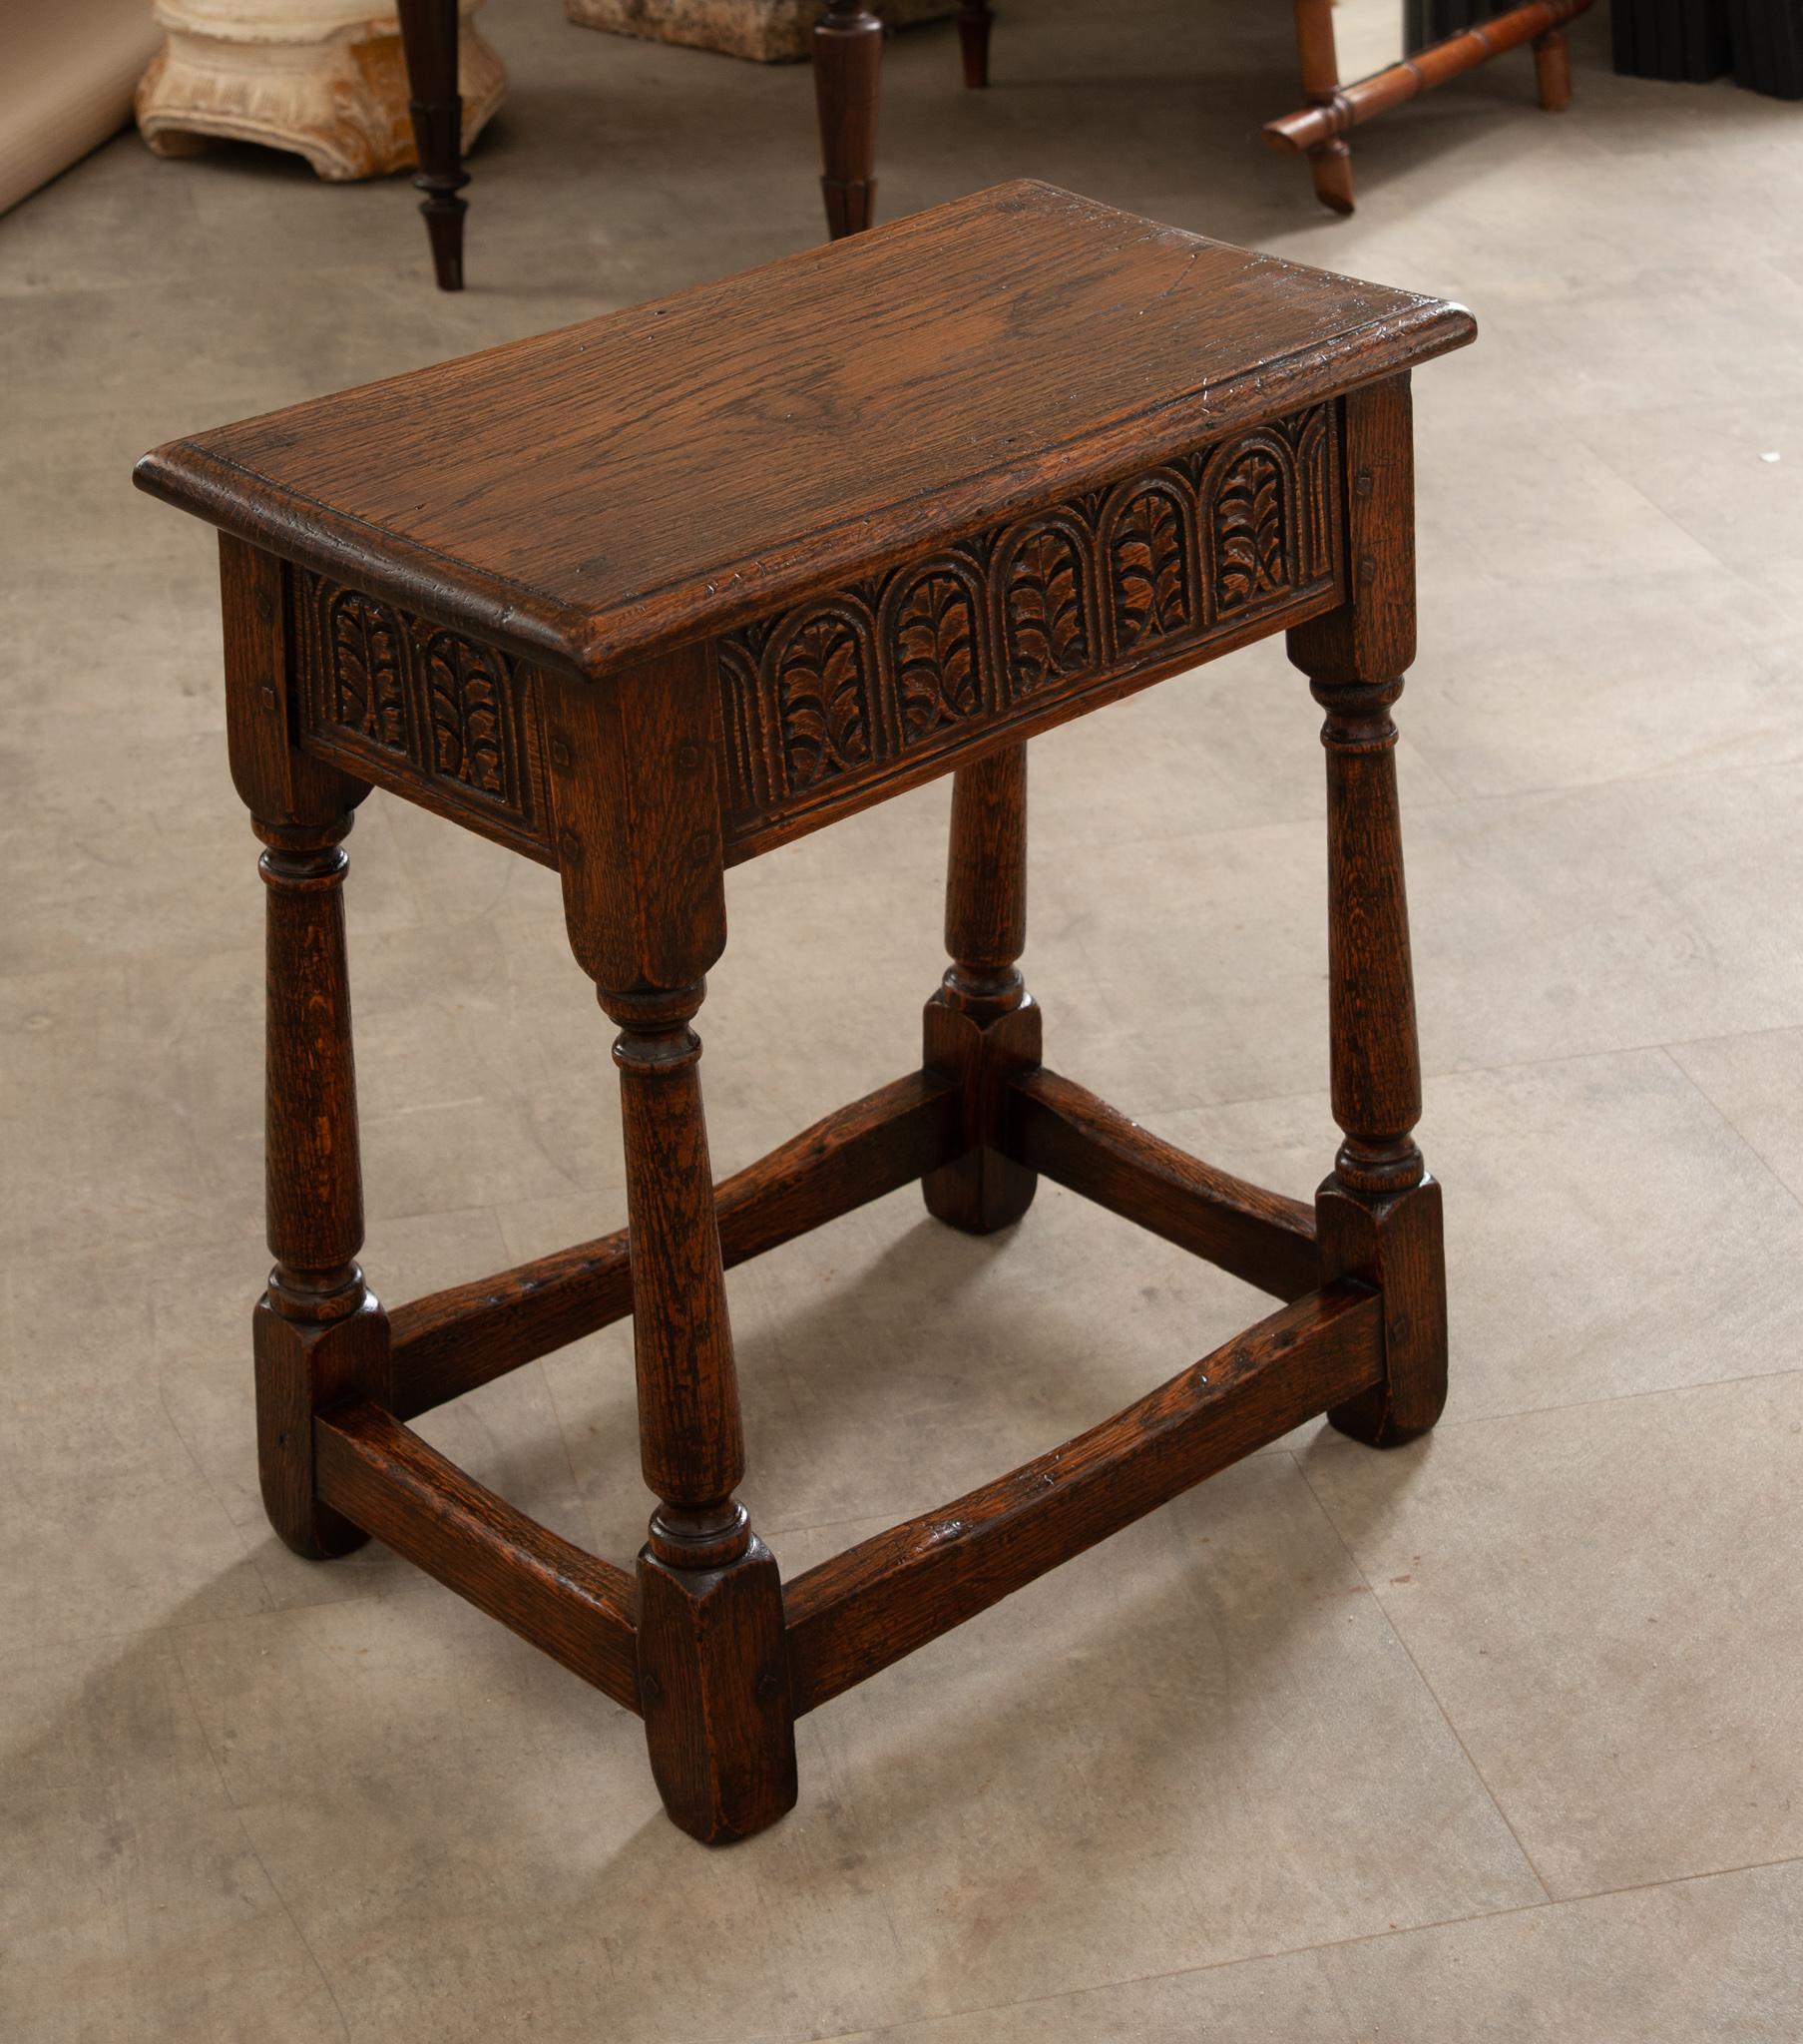 A wonderful oak joint stool made in England in the 19th century featuring a simple top that has a molded edge following down to wonderfully hand carved aprons with foliage pattern decoration on all four sides which allows for easy placement in any